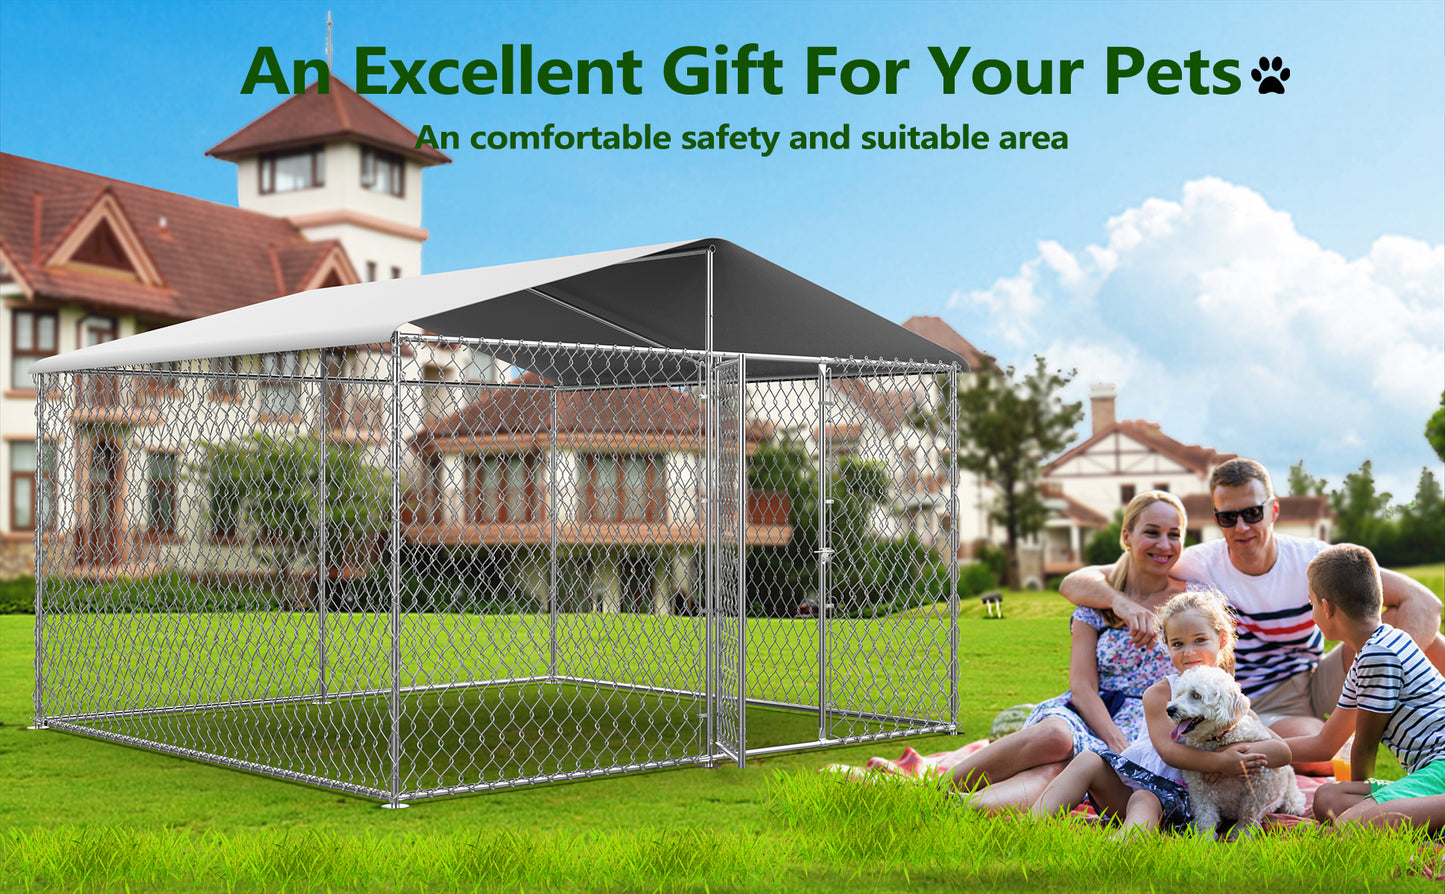 Large Dog Kennel Outdoor, Heavy Duty Outdoor Dog Kennel Chain Link Dog Cage Dog Playpen Dogs Run with Lock UV & Waterproof Roof for Backyard (7.5 * 7.5 * 5.6FT)